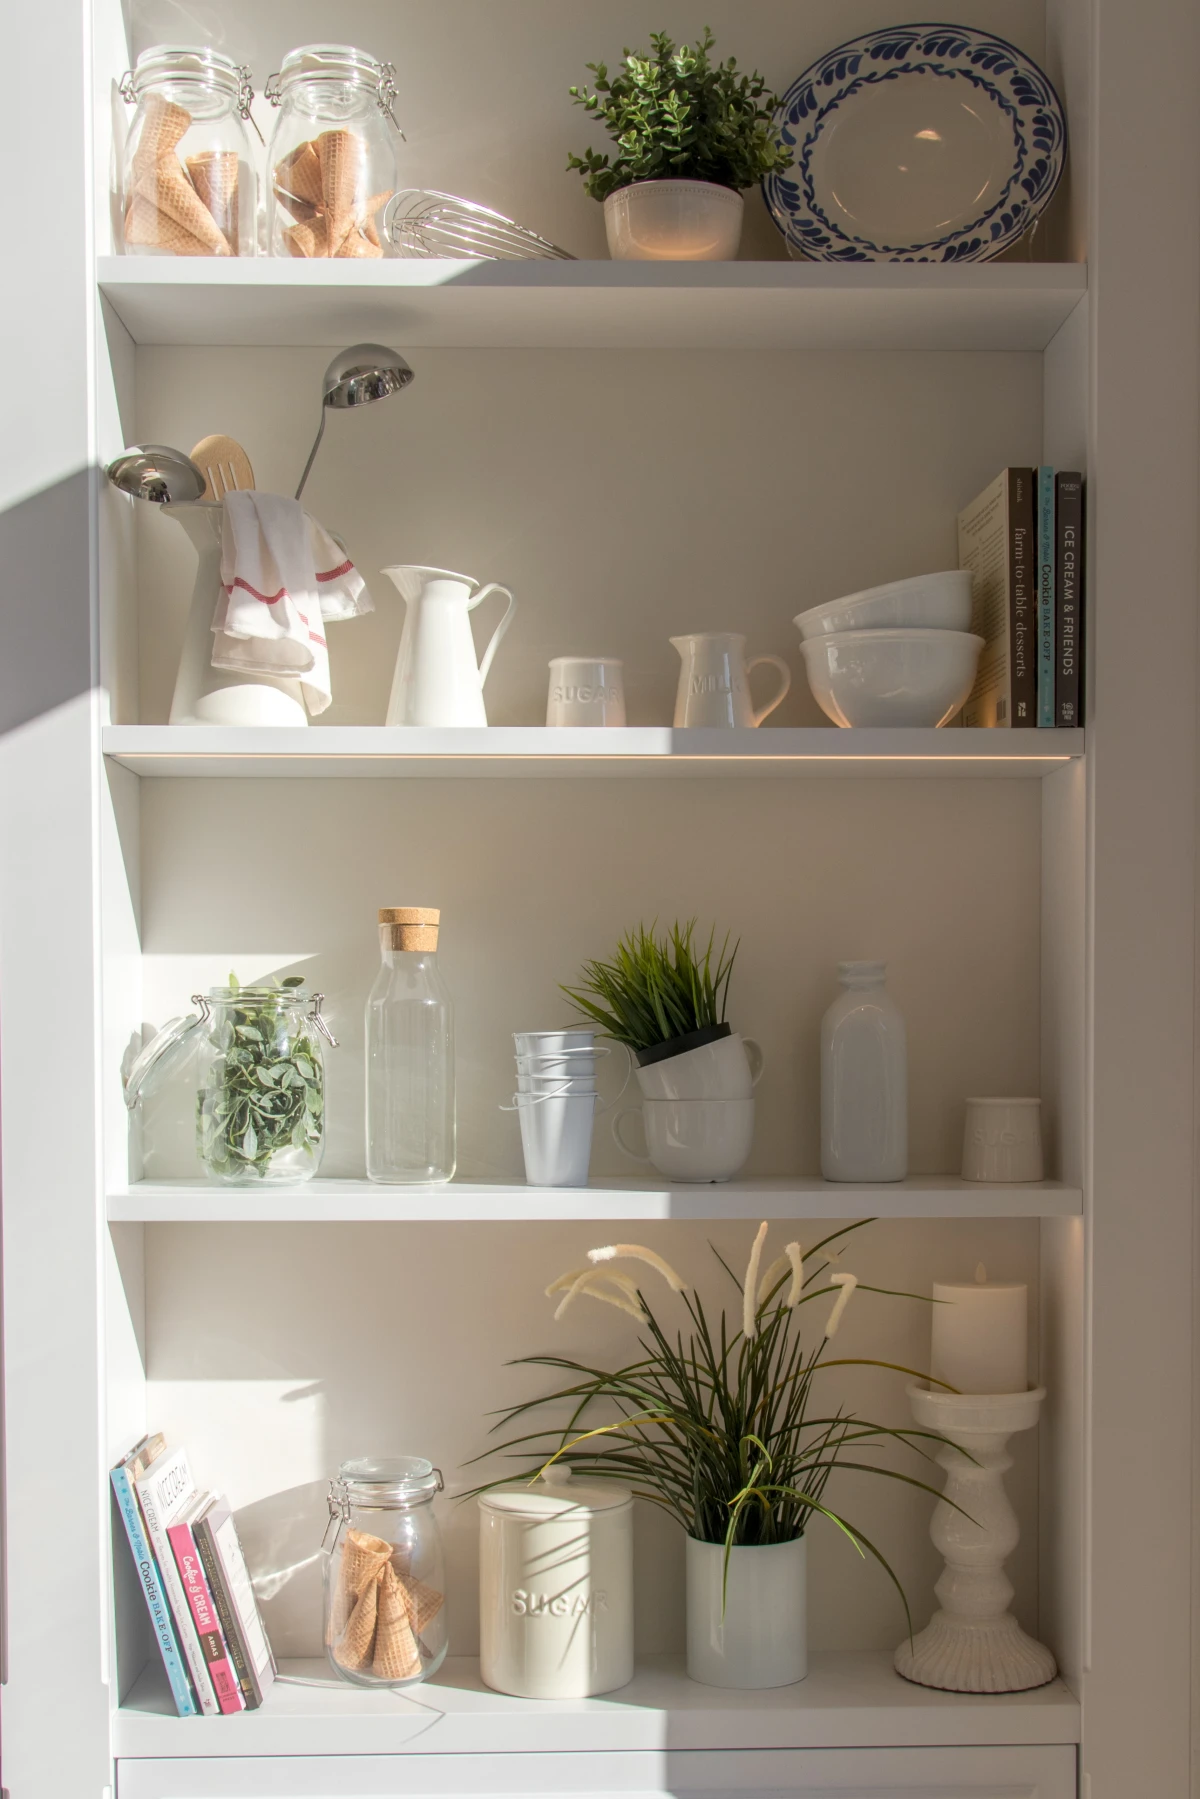 shelves with kitchen items